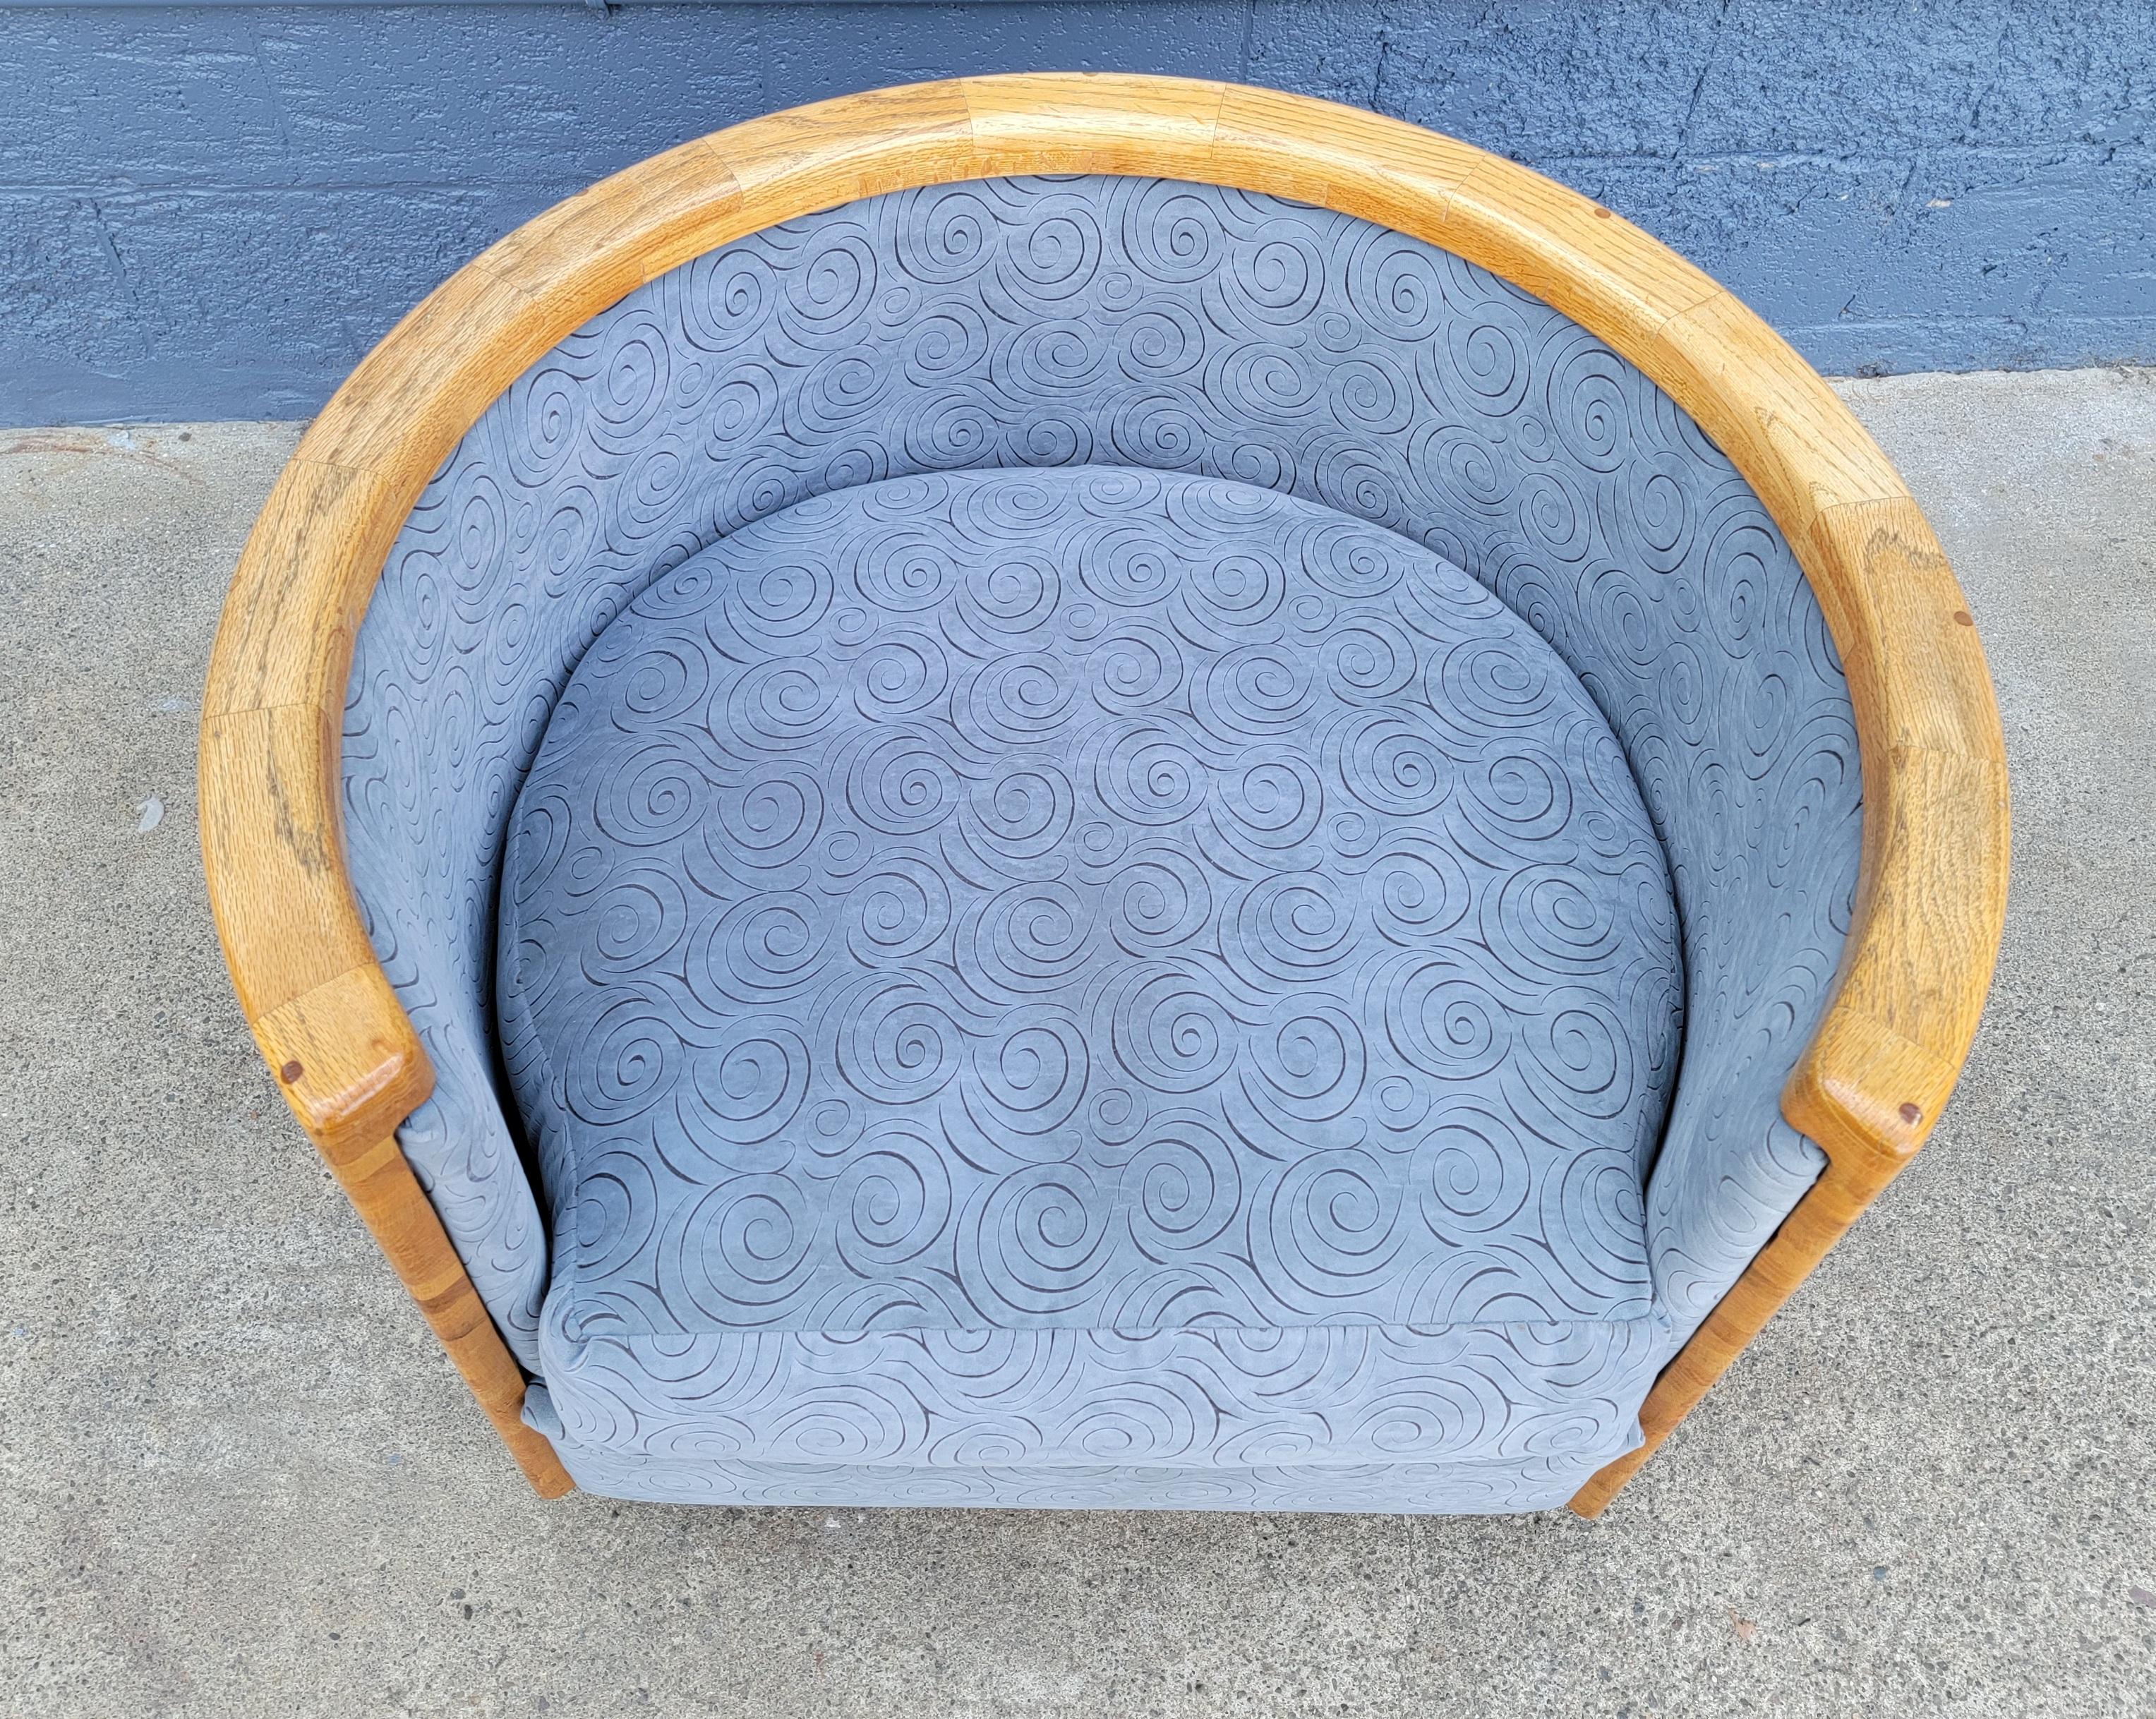 Substantial swivel lounge chair made of solid butcher block. Perfect circular form with opening for seating. Very recent new upholstery. Reversible seat cushion. This is a finely crafted, solid wood, heavy chair.